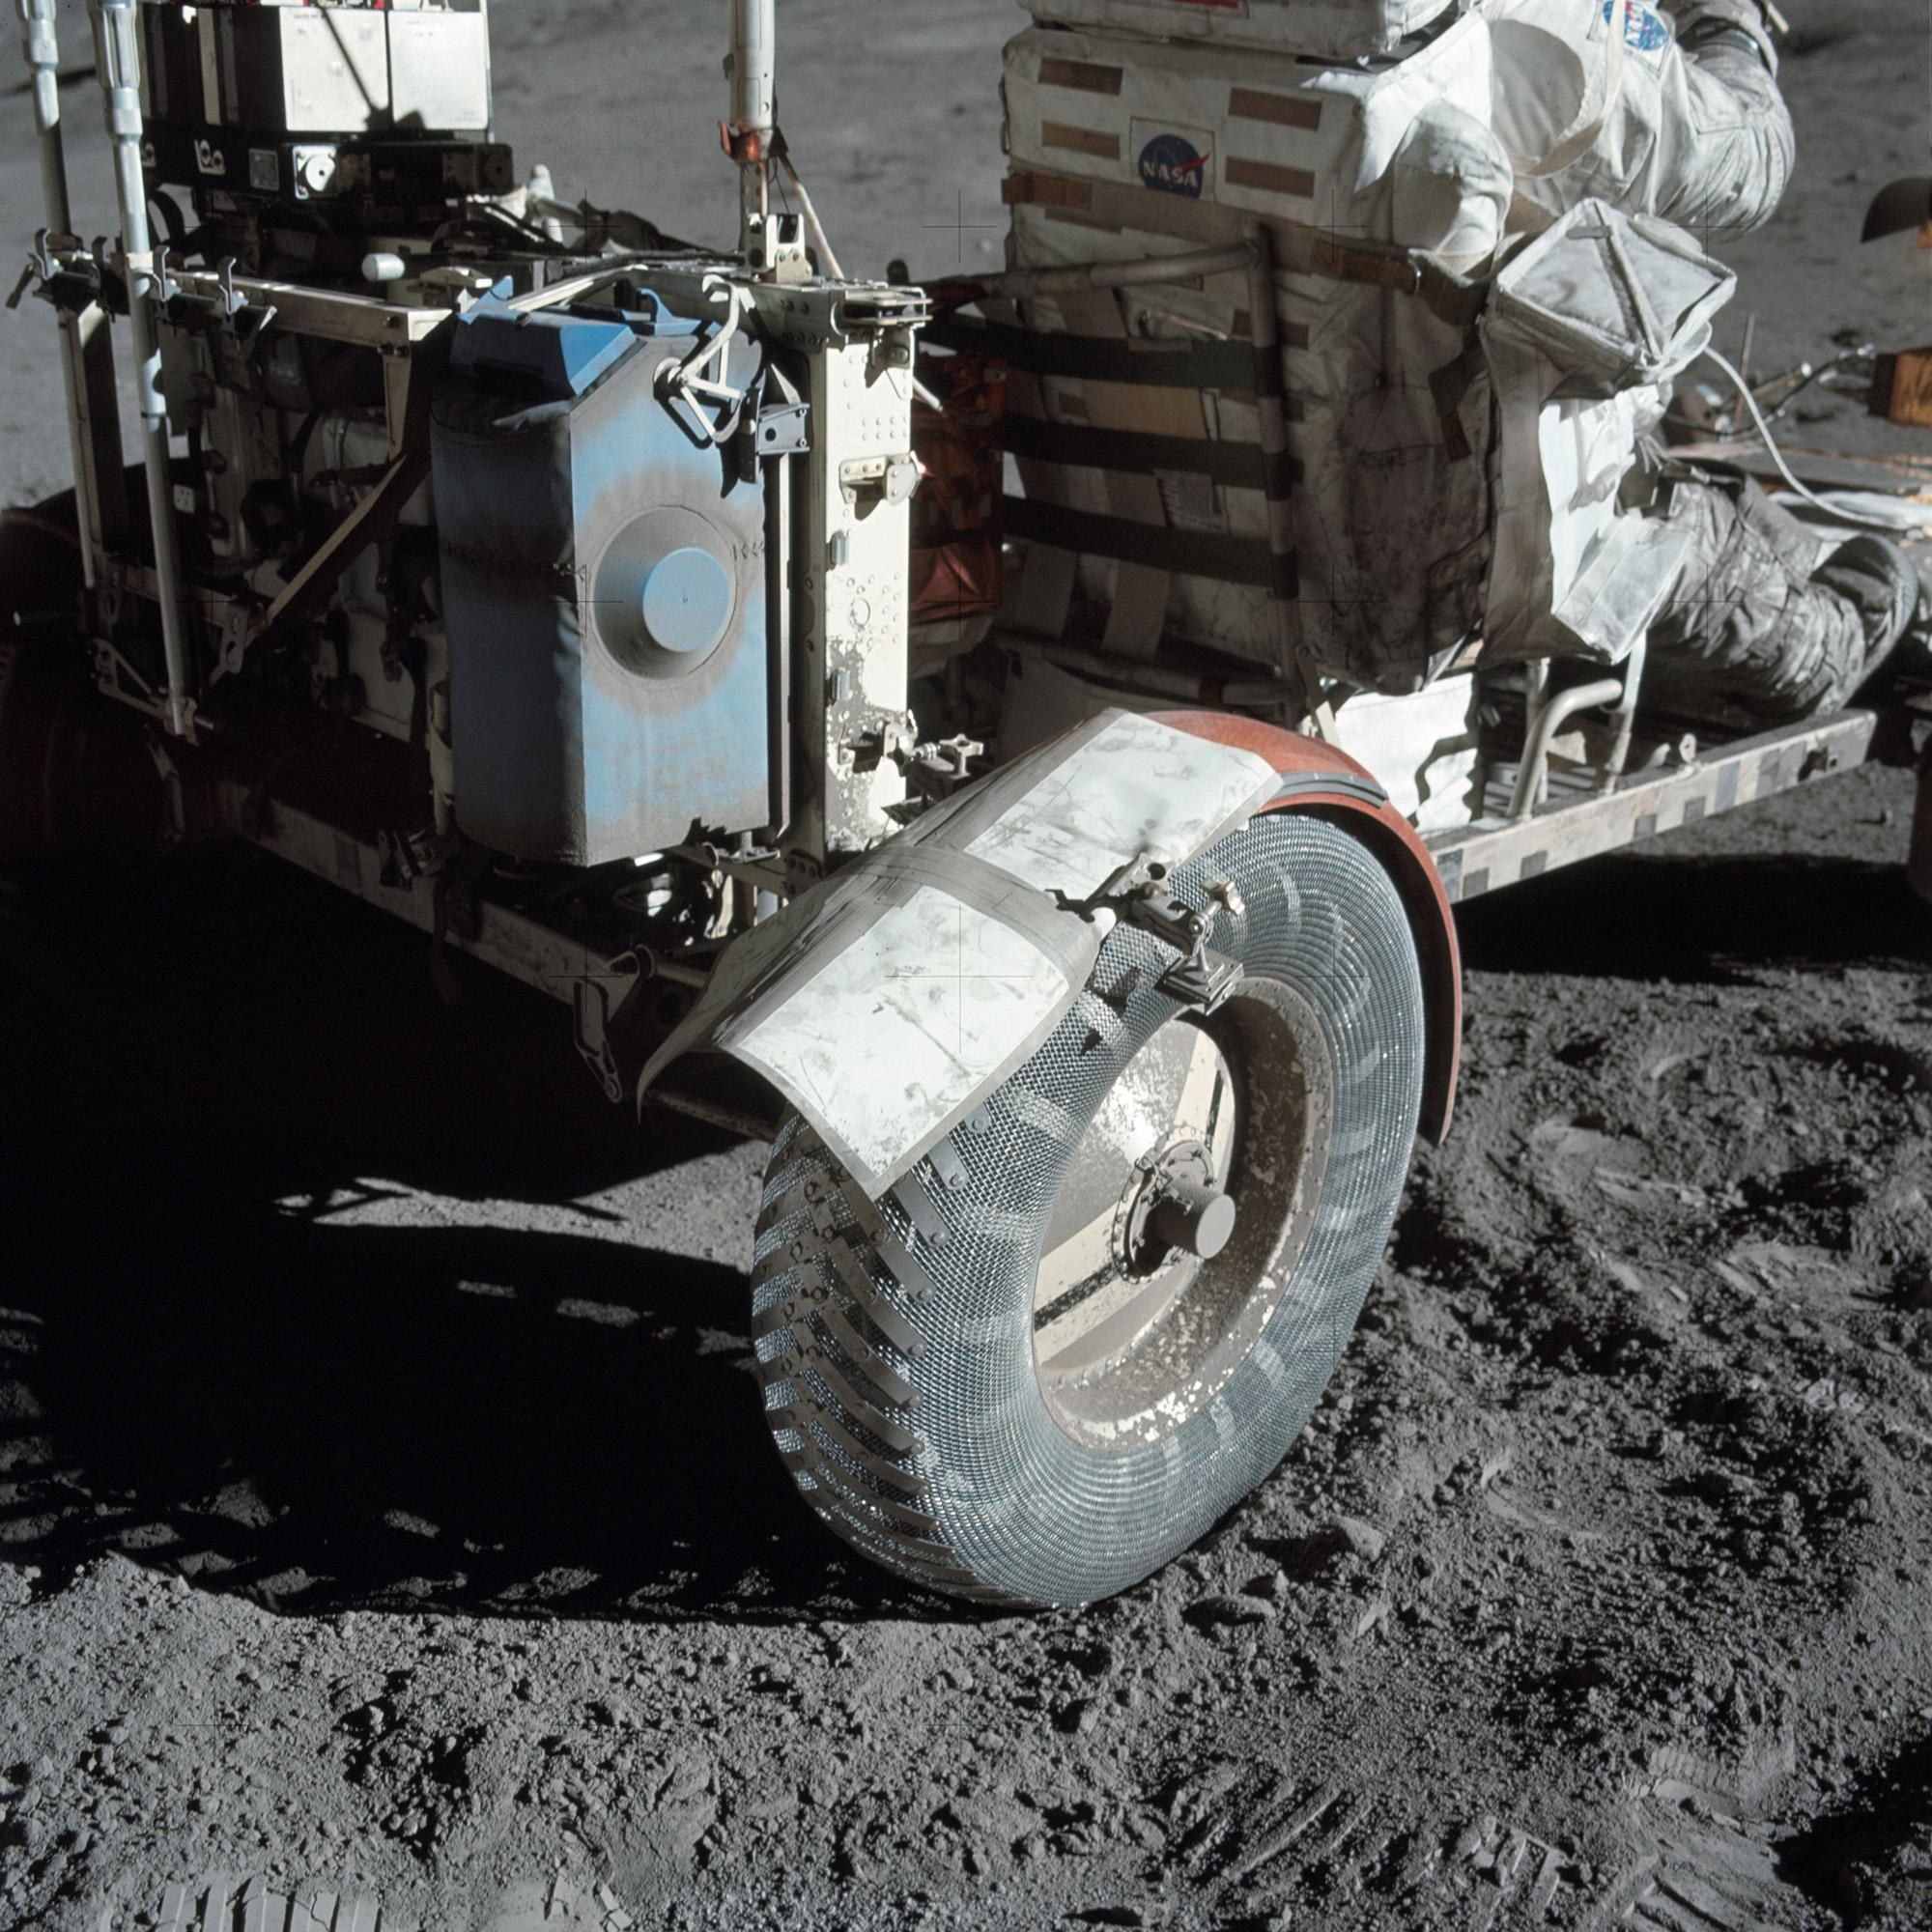 Necessity is the mother of invention on the Moon, too